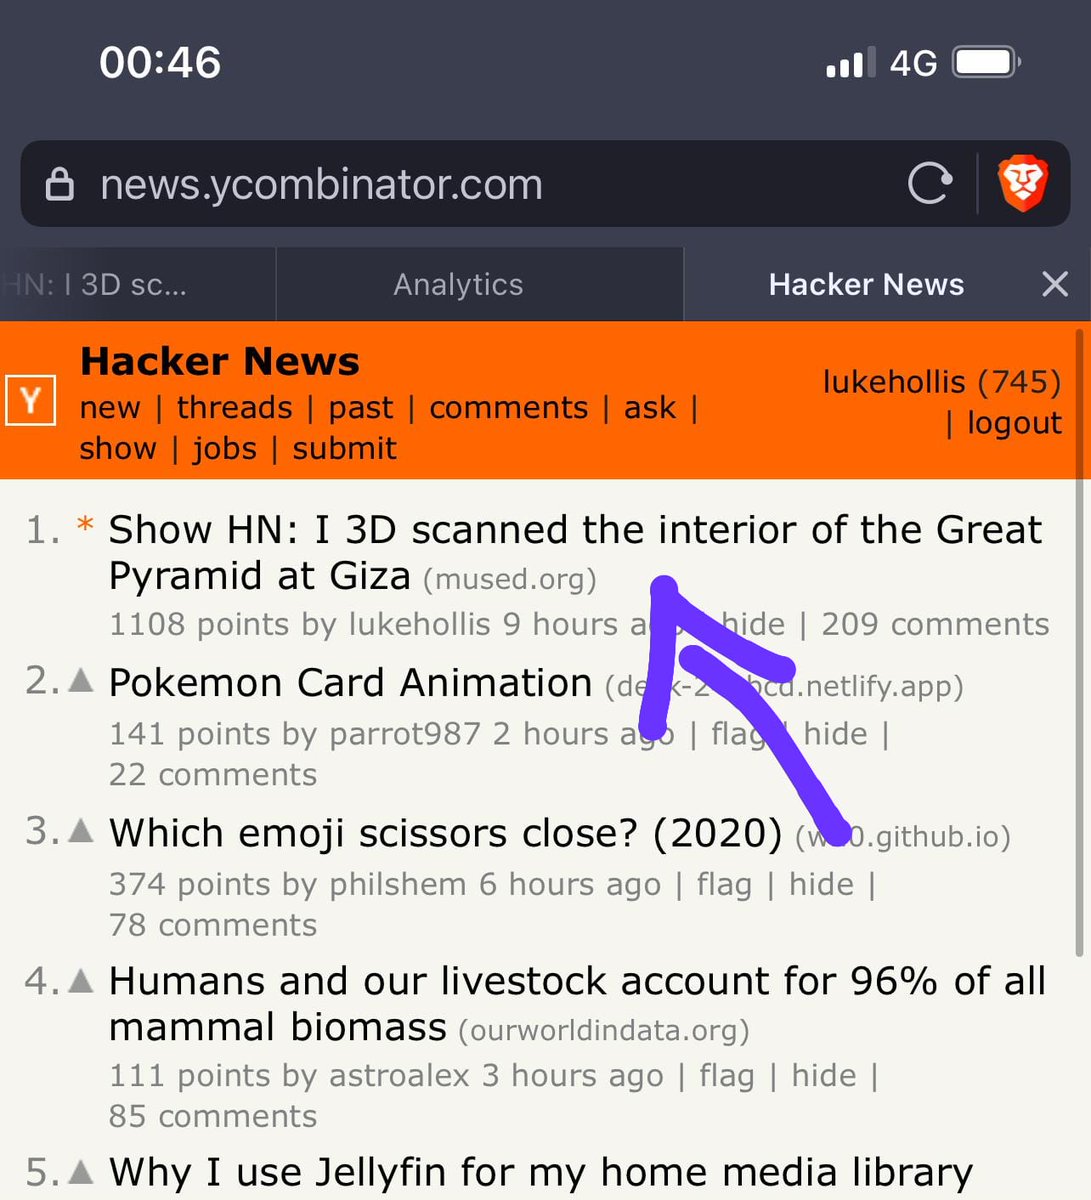 Crossed 'get to top of @hackernews' off the bucket list. Wow, thanks everyone for the response, and I never imagined the Great Pyramid guided tour would be received so well. 

Digitization is important for preservation, conservation & site education in #Heritage #MuseTech #GLAM3d